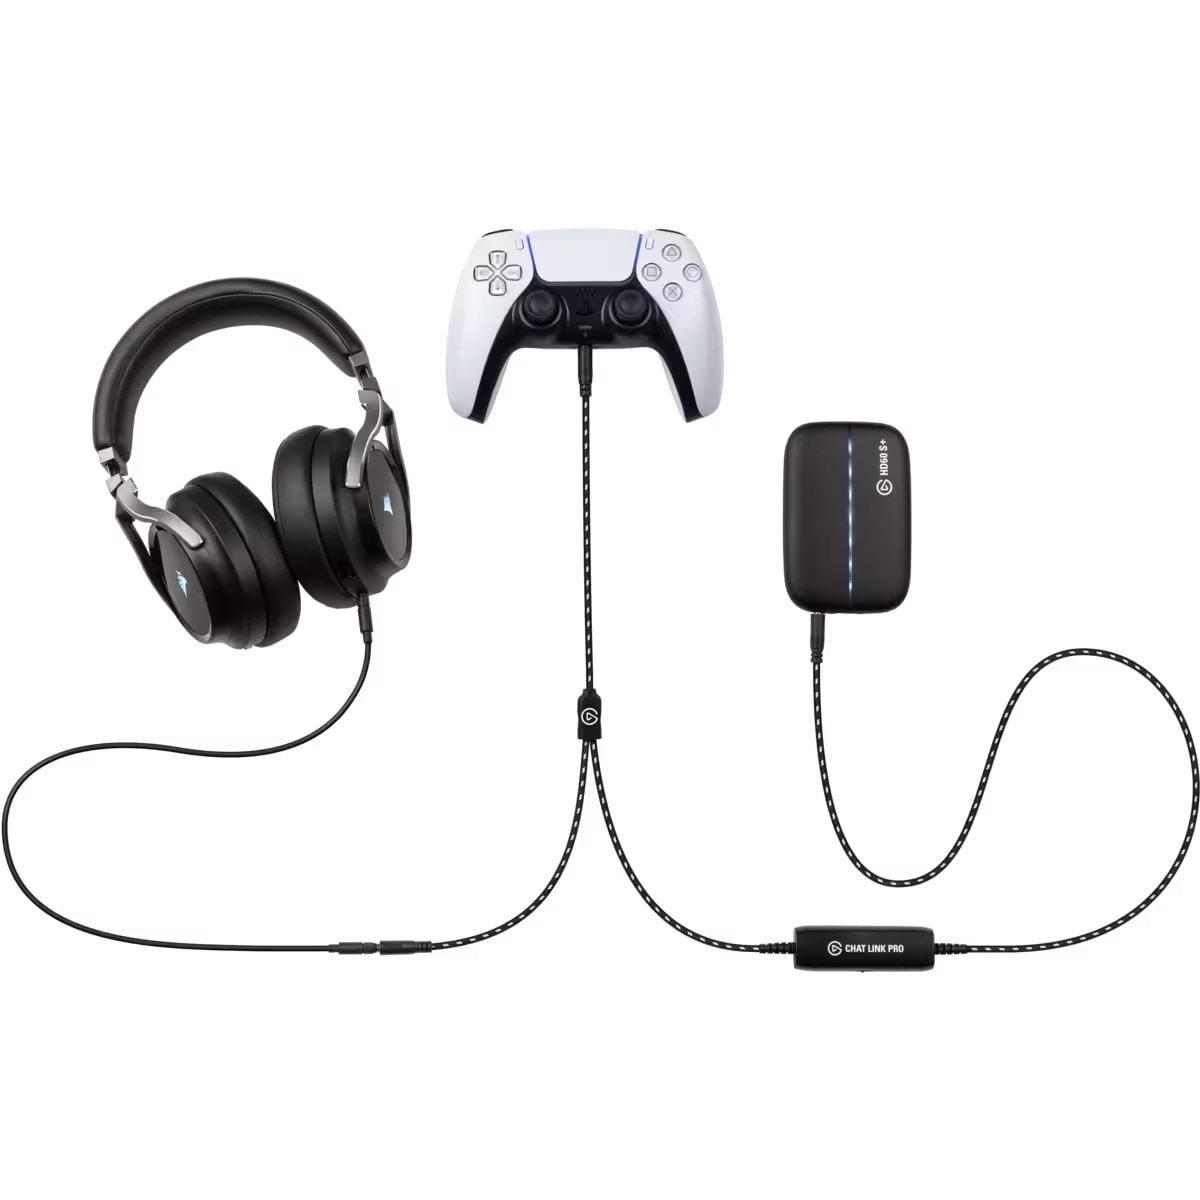 Audio-Adapter »Chat Link Pro«, 250 cm, Audio-Adapter für PS5, PS4, Nintendo Switch,...